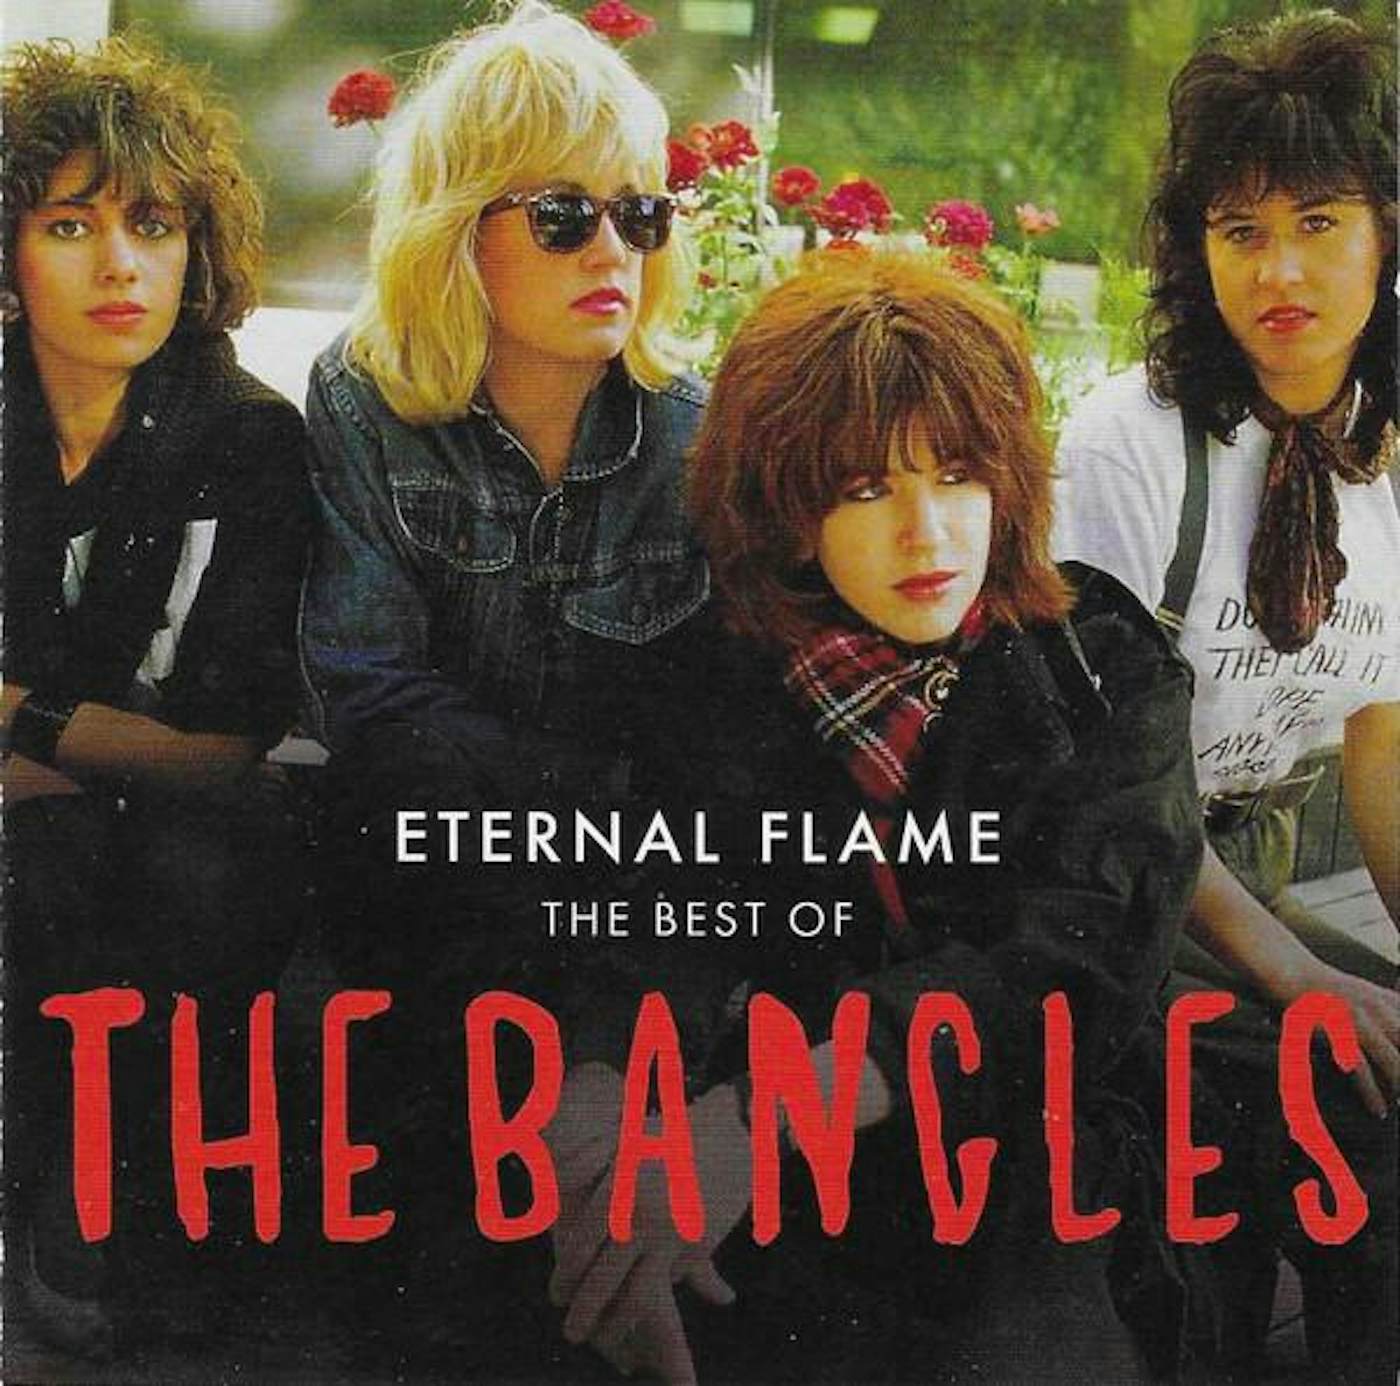 The Bangles ETERNAL FLAME: THE BEST OF CD $18.99$16.99